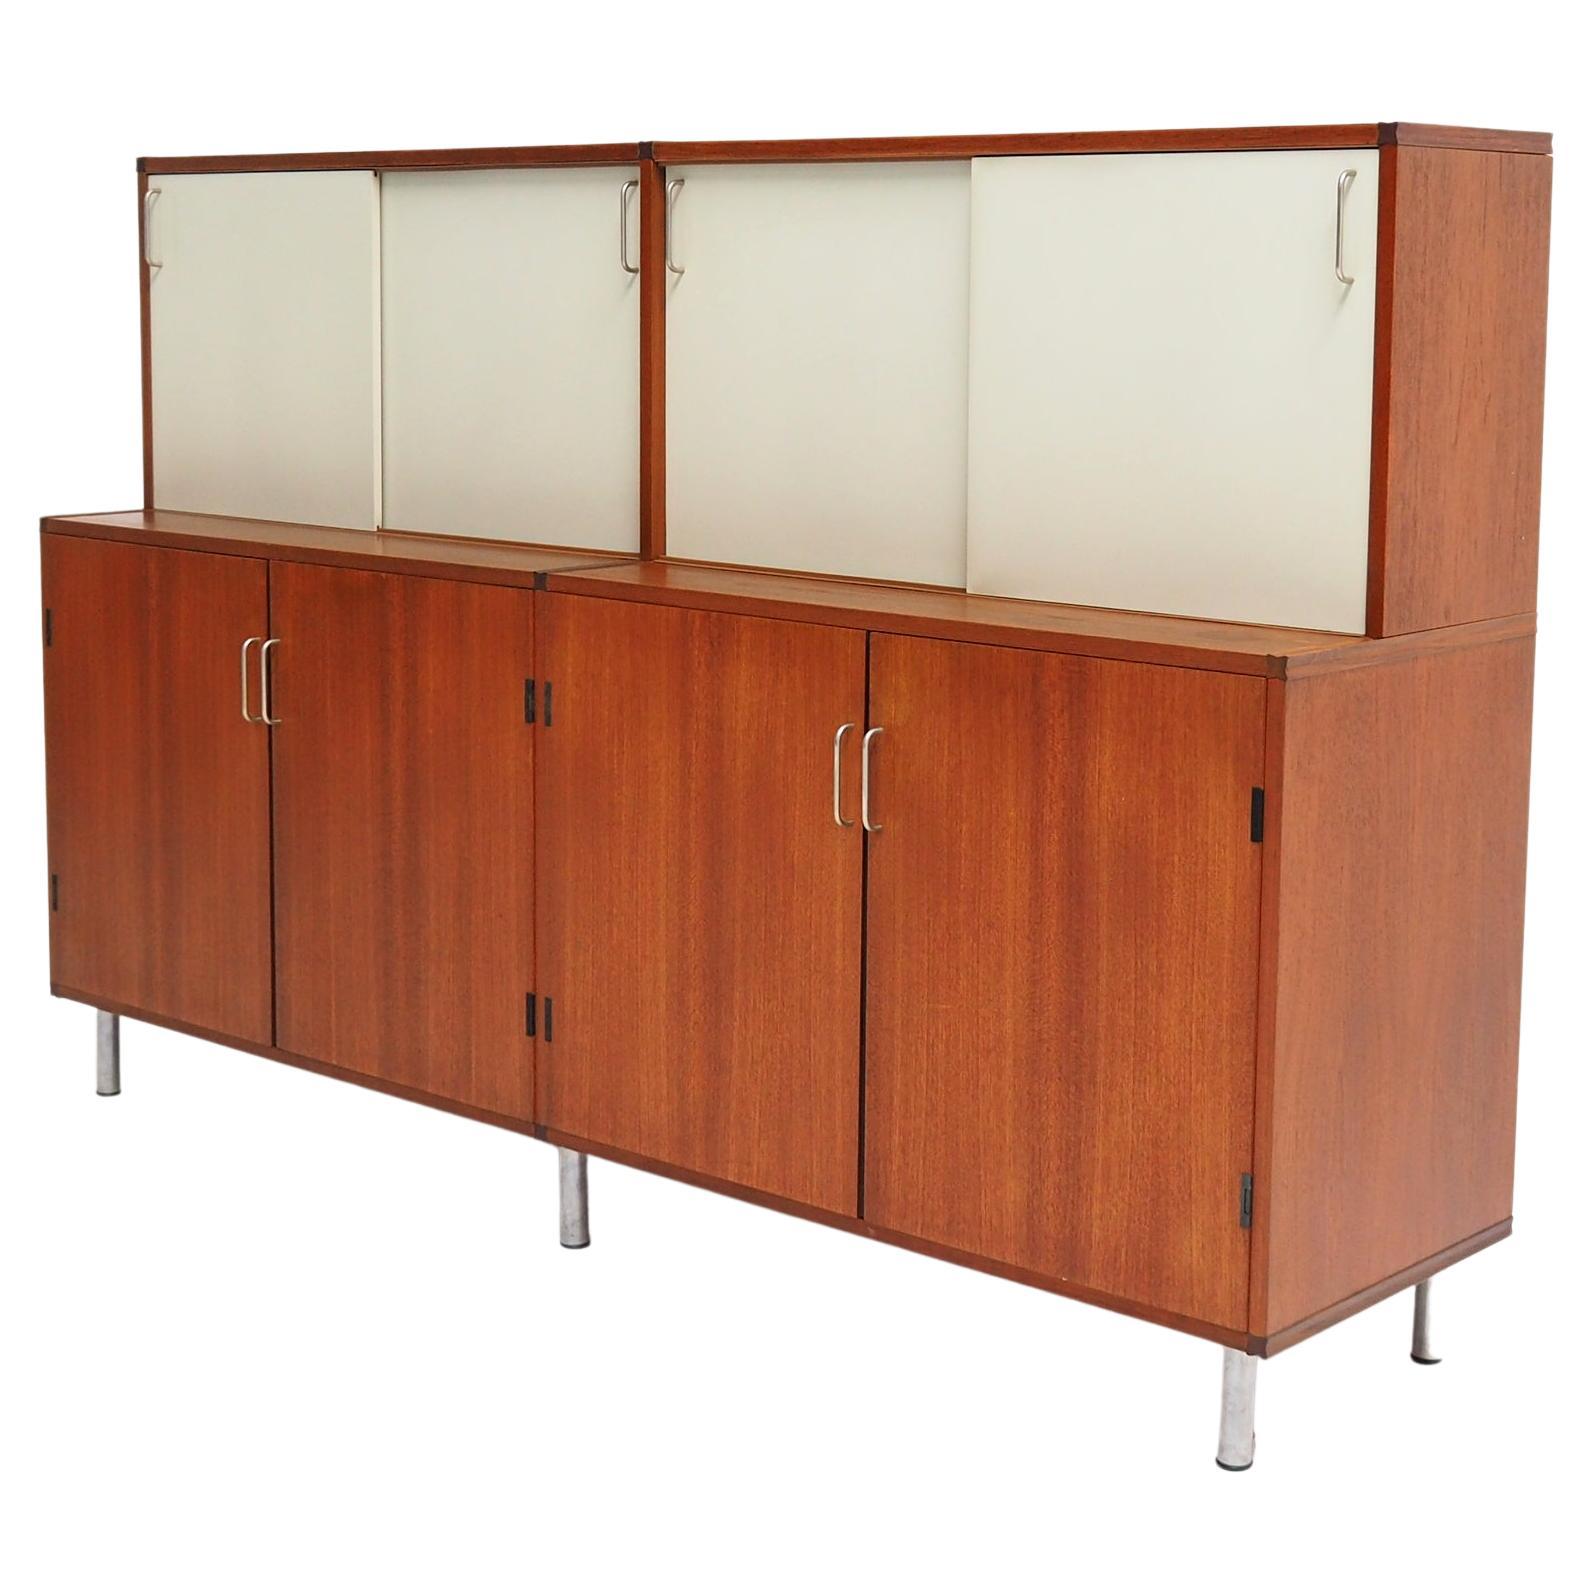 Two Tiered Cabinet with Sliding Doors by Cees Braakman for Pastoe